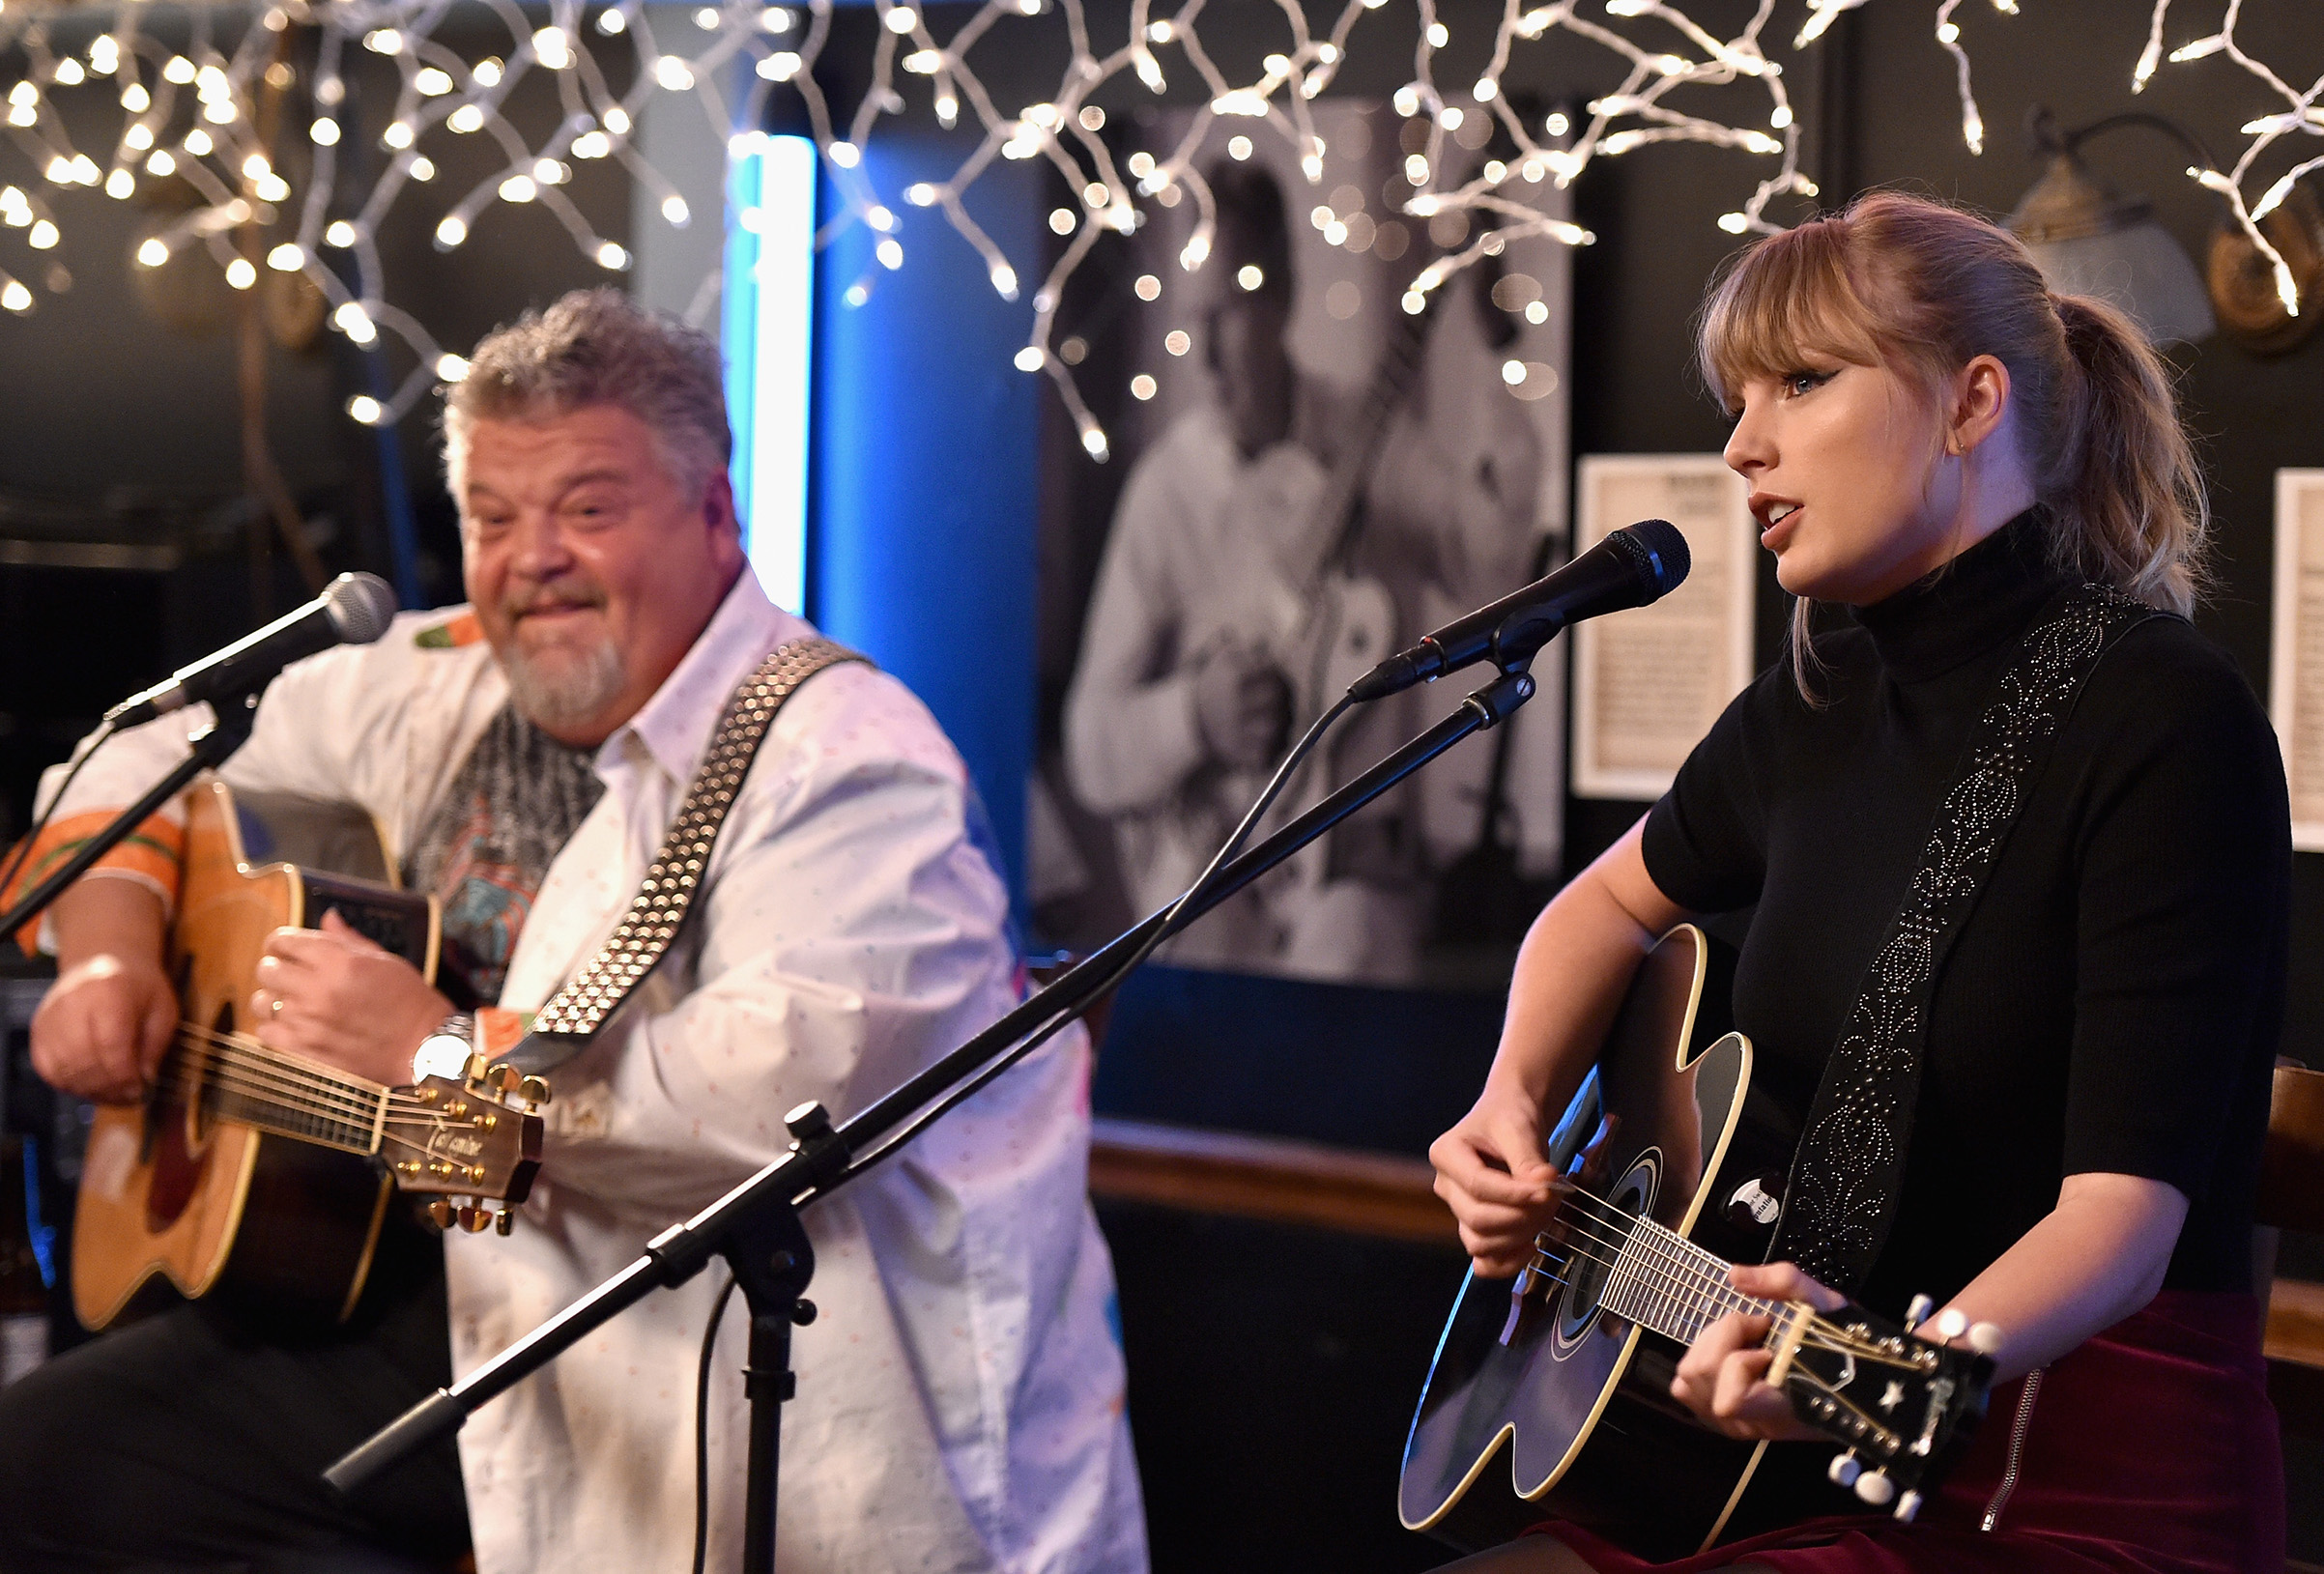 Craig Wiseman and Special Guest Taylor Swift at Bluebird Cafe